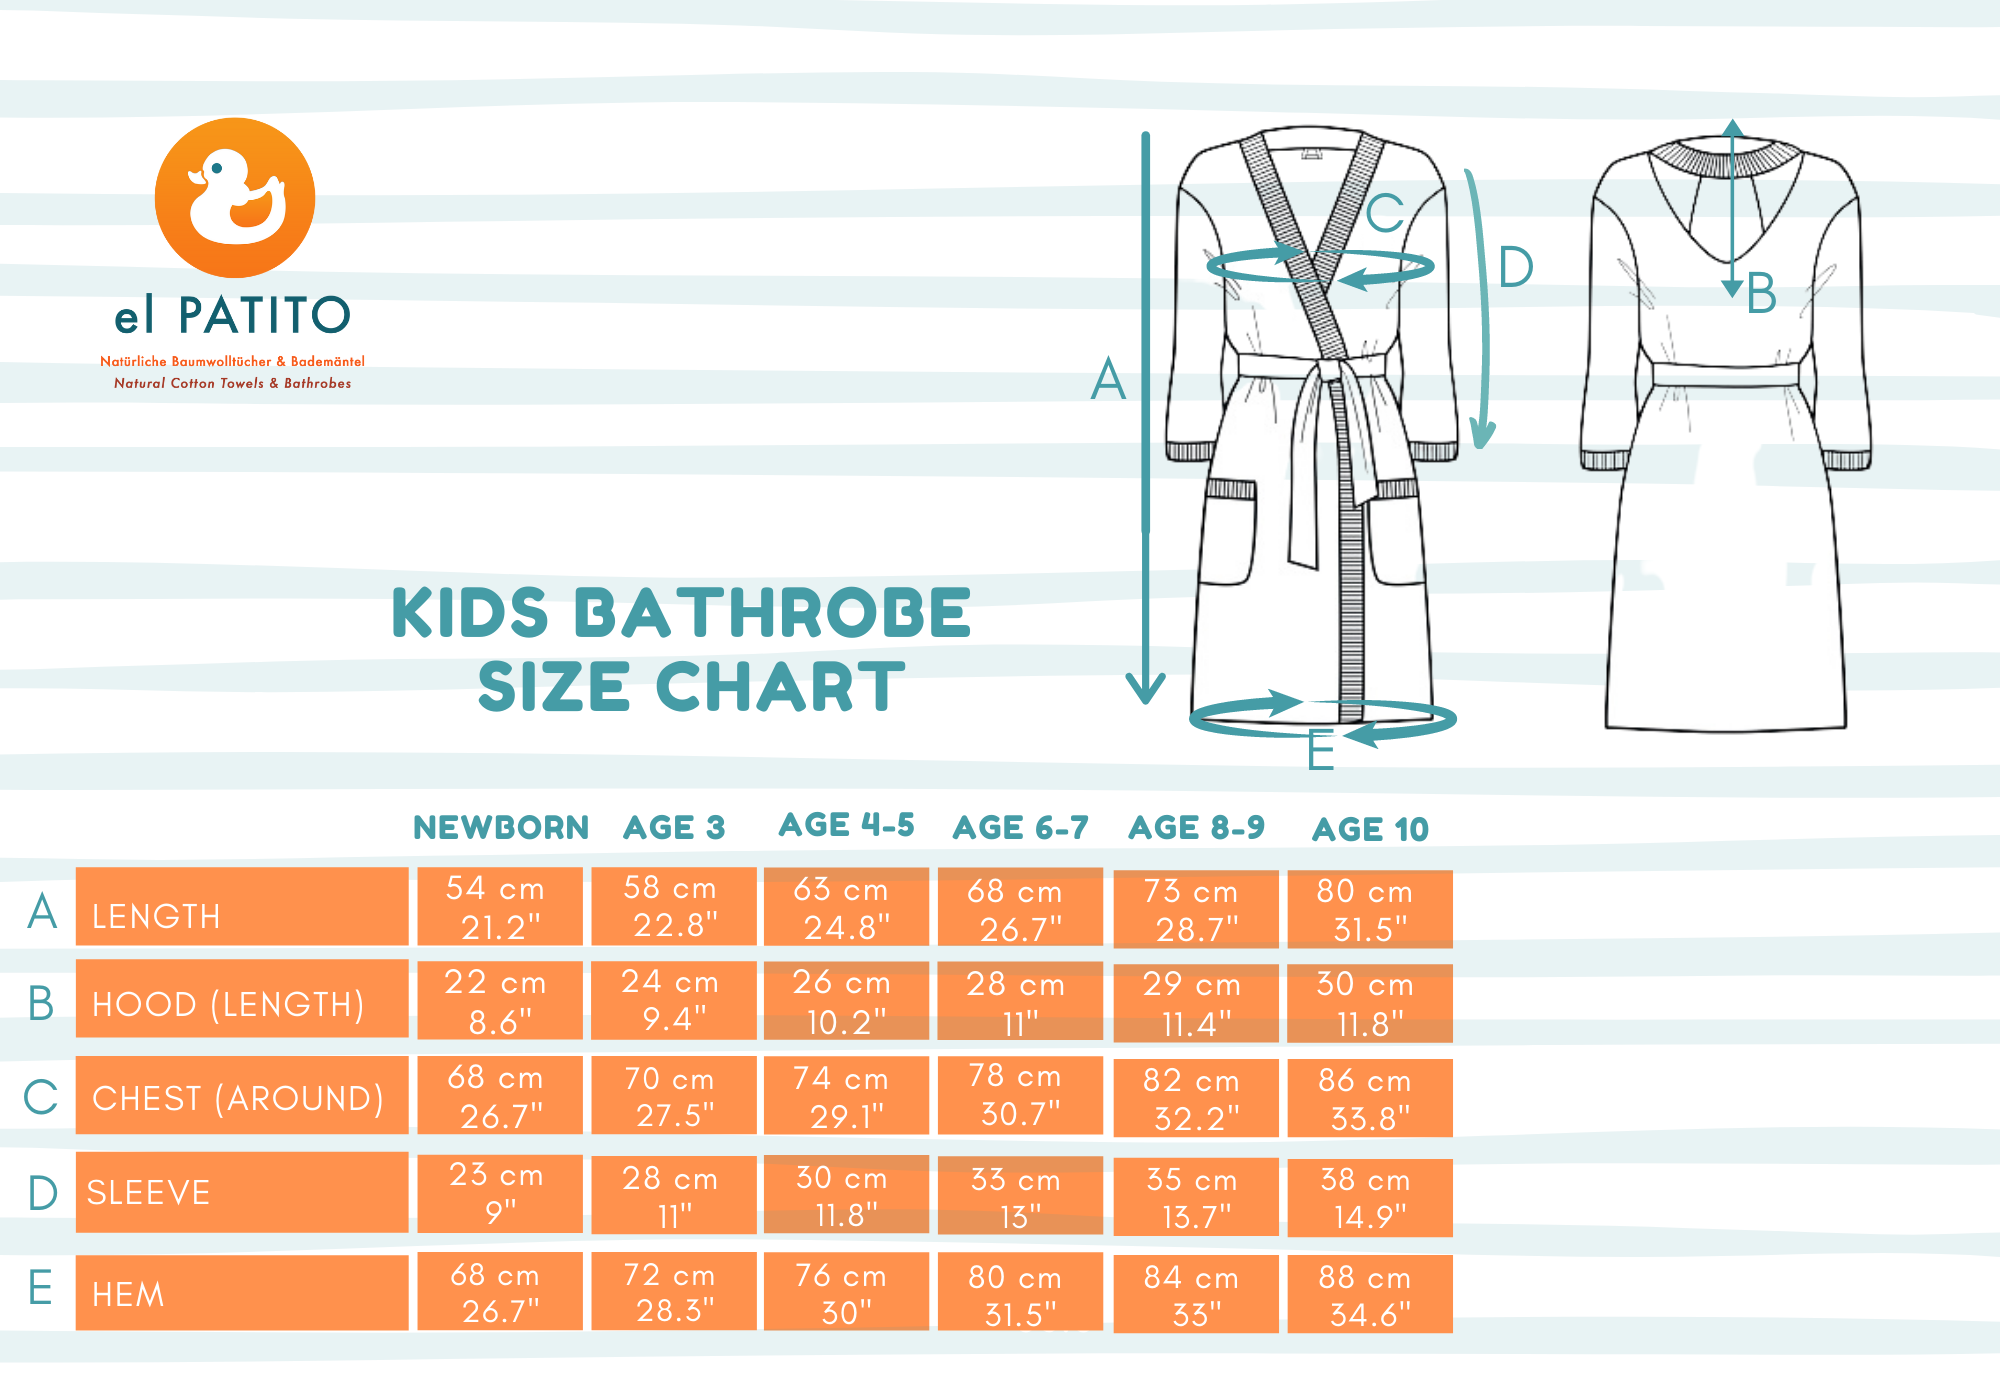 Summer, beach, pool robes for boho chic baby & kids - CONTEMPORARY SERIES